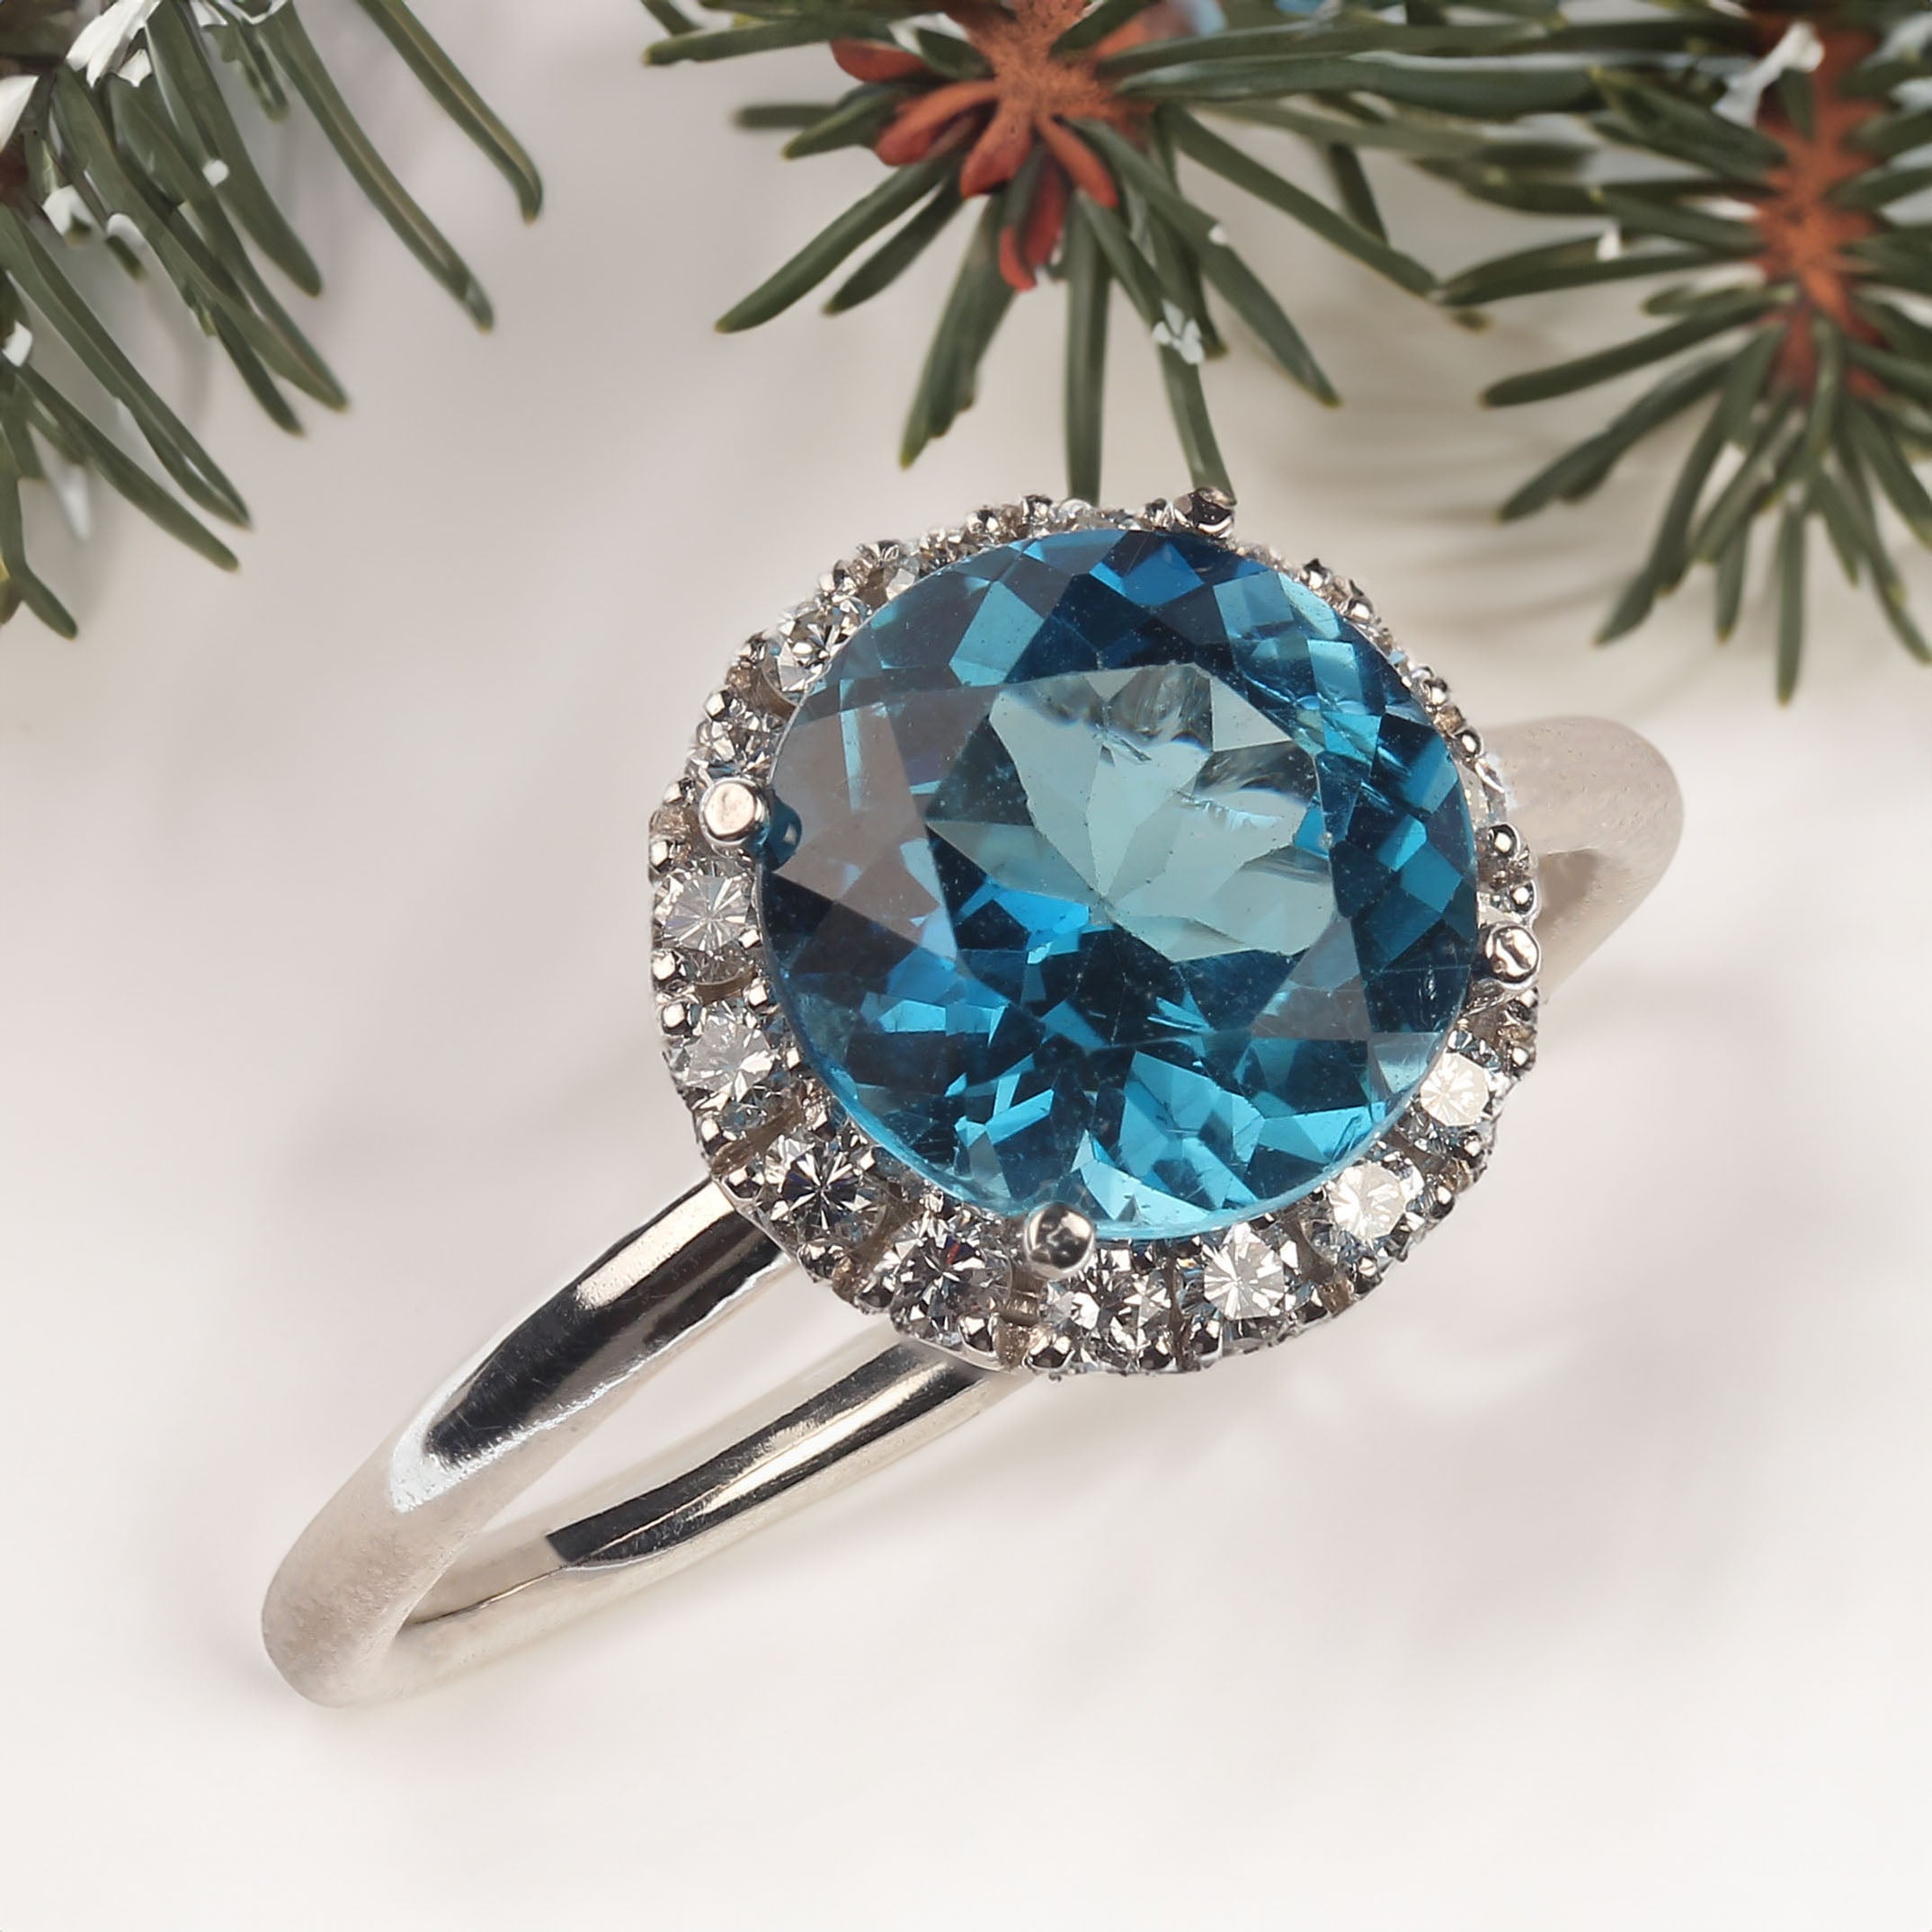 Unique round sparkling Blue Topaz, 2.19ct, and a halo of glittering Diamonds, 0.23ct, all set in 14K white gold ring.  This delightful ring is one of a kind and just what you want for day into evening wear.  No changes by seller.  This is a sizable